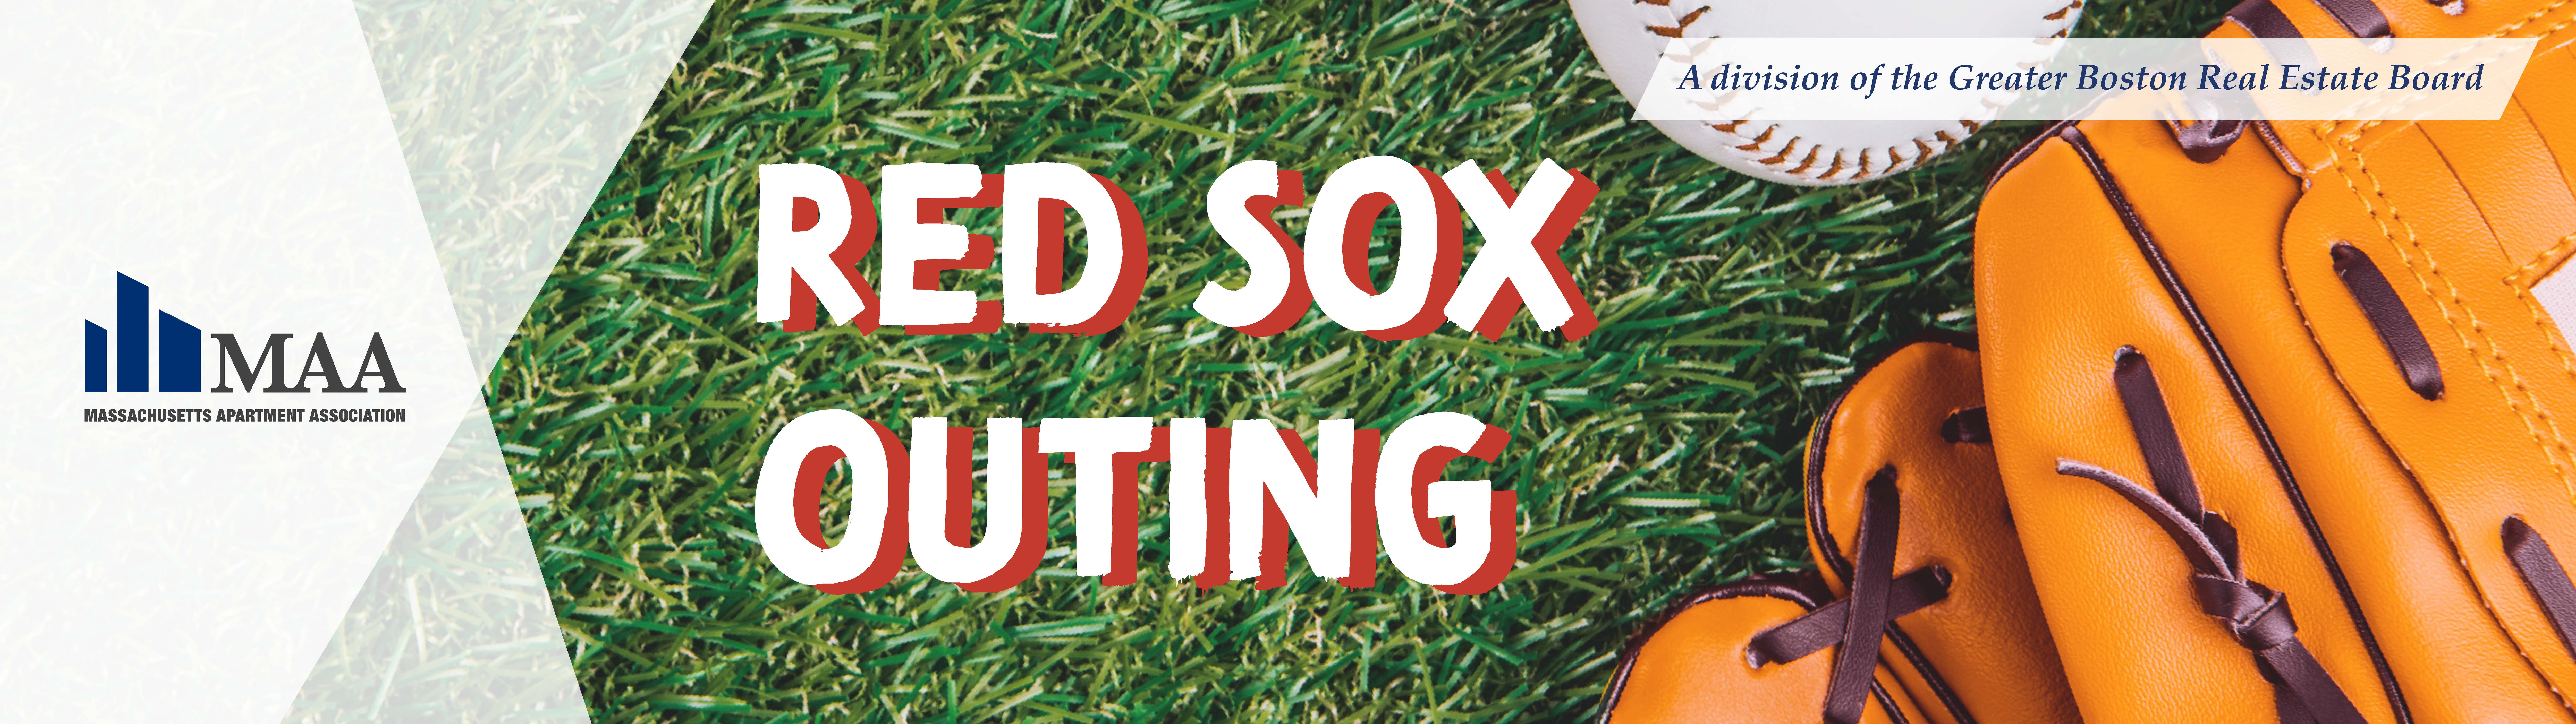 2021 MAA Red Sox Outing